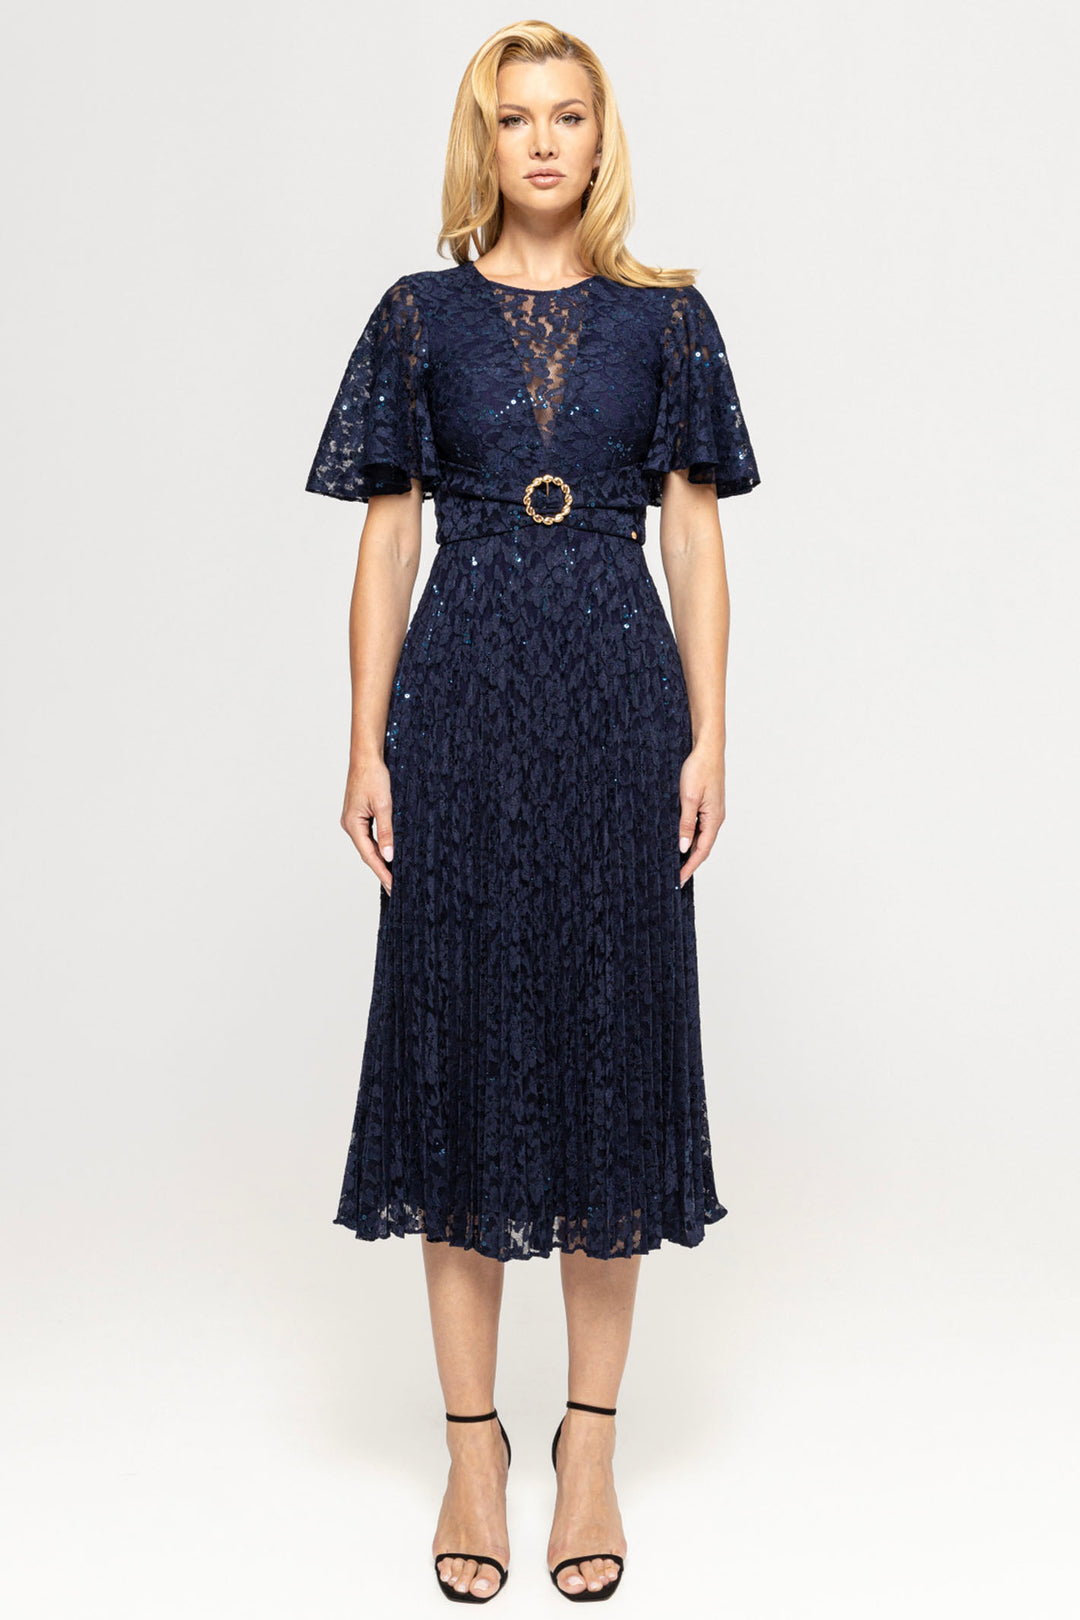 Nissa RS14932 Navy Sequined Lace Short Sleeve Pleated Midi Dress - Dotique